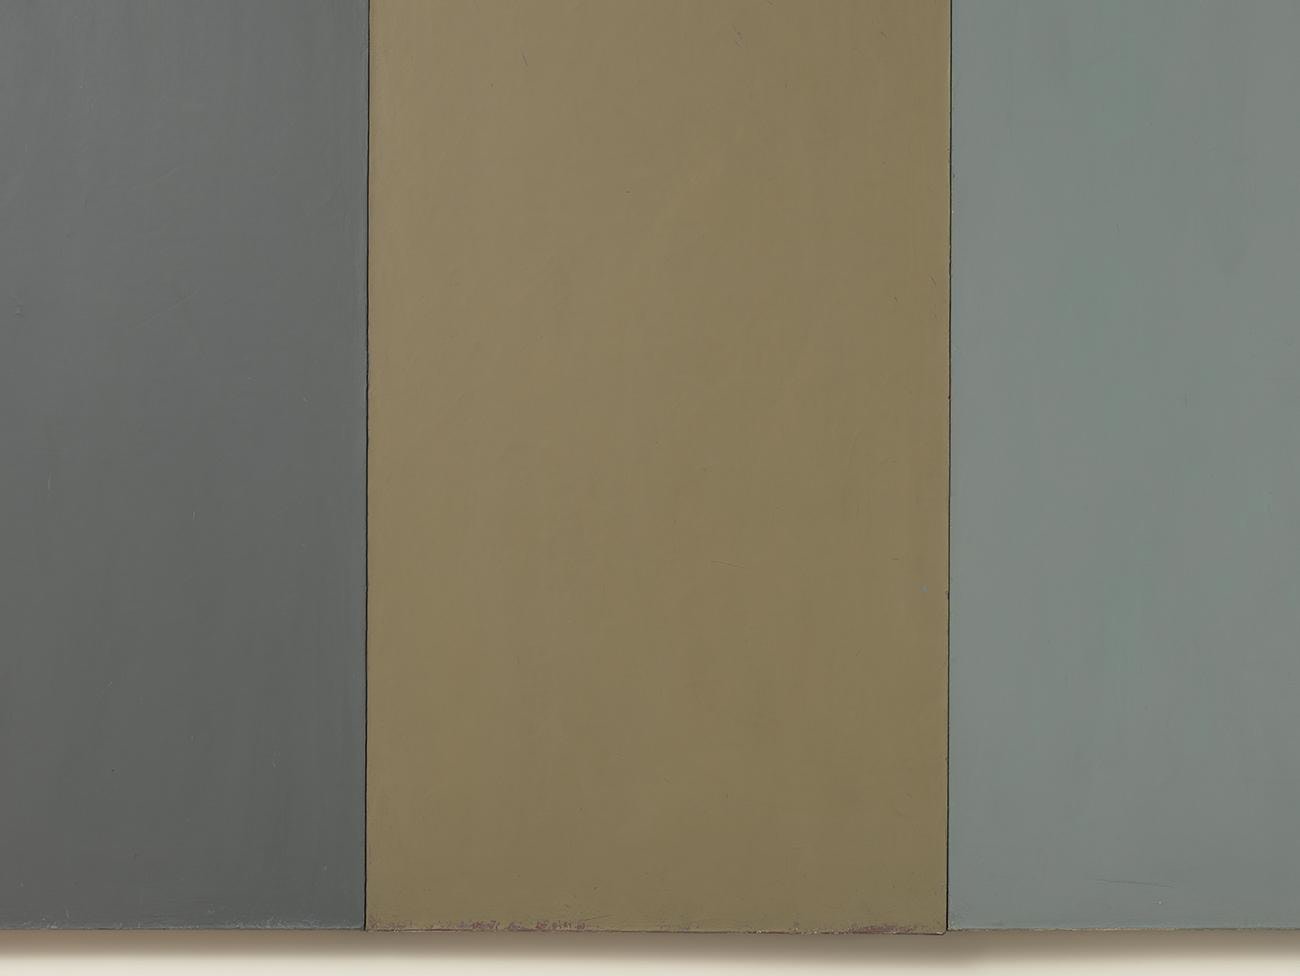 Brice Marden
Shunt
1972
oil and beeswax on canvas
three panels, overall: 60 x 72 inches (152.4 x 182.9 cm)

Private collection, New York